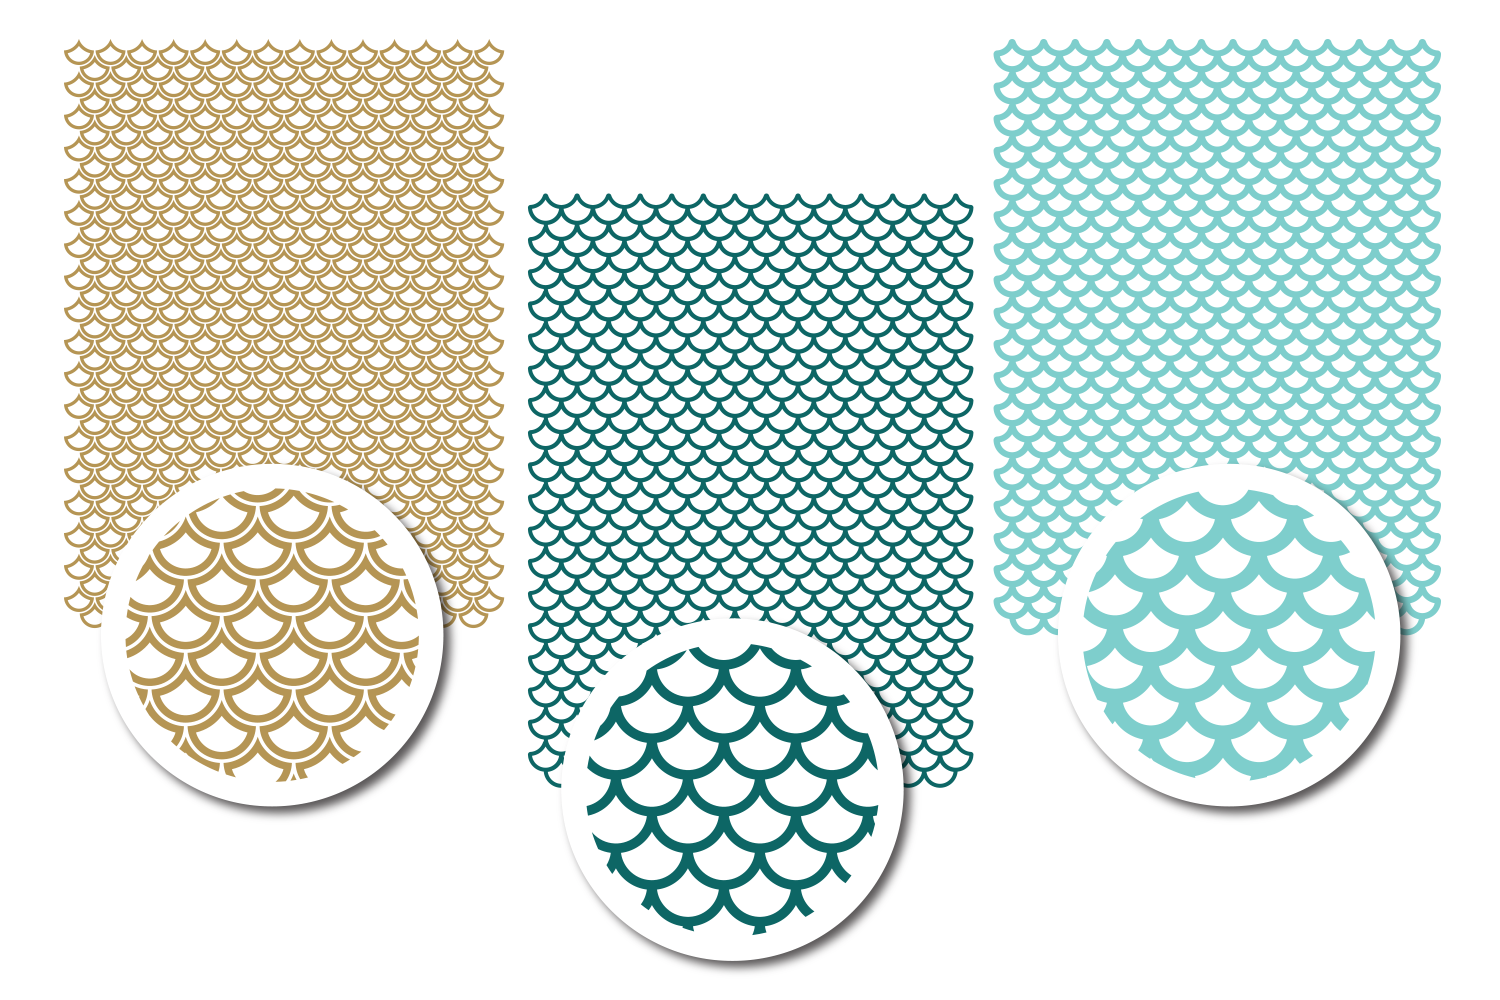 Download Mermaid Scales SVG Fish Scales in SVG, DXF, PNG, EPS